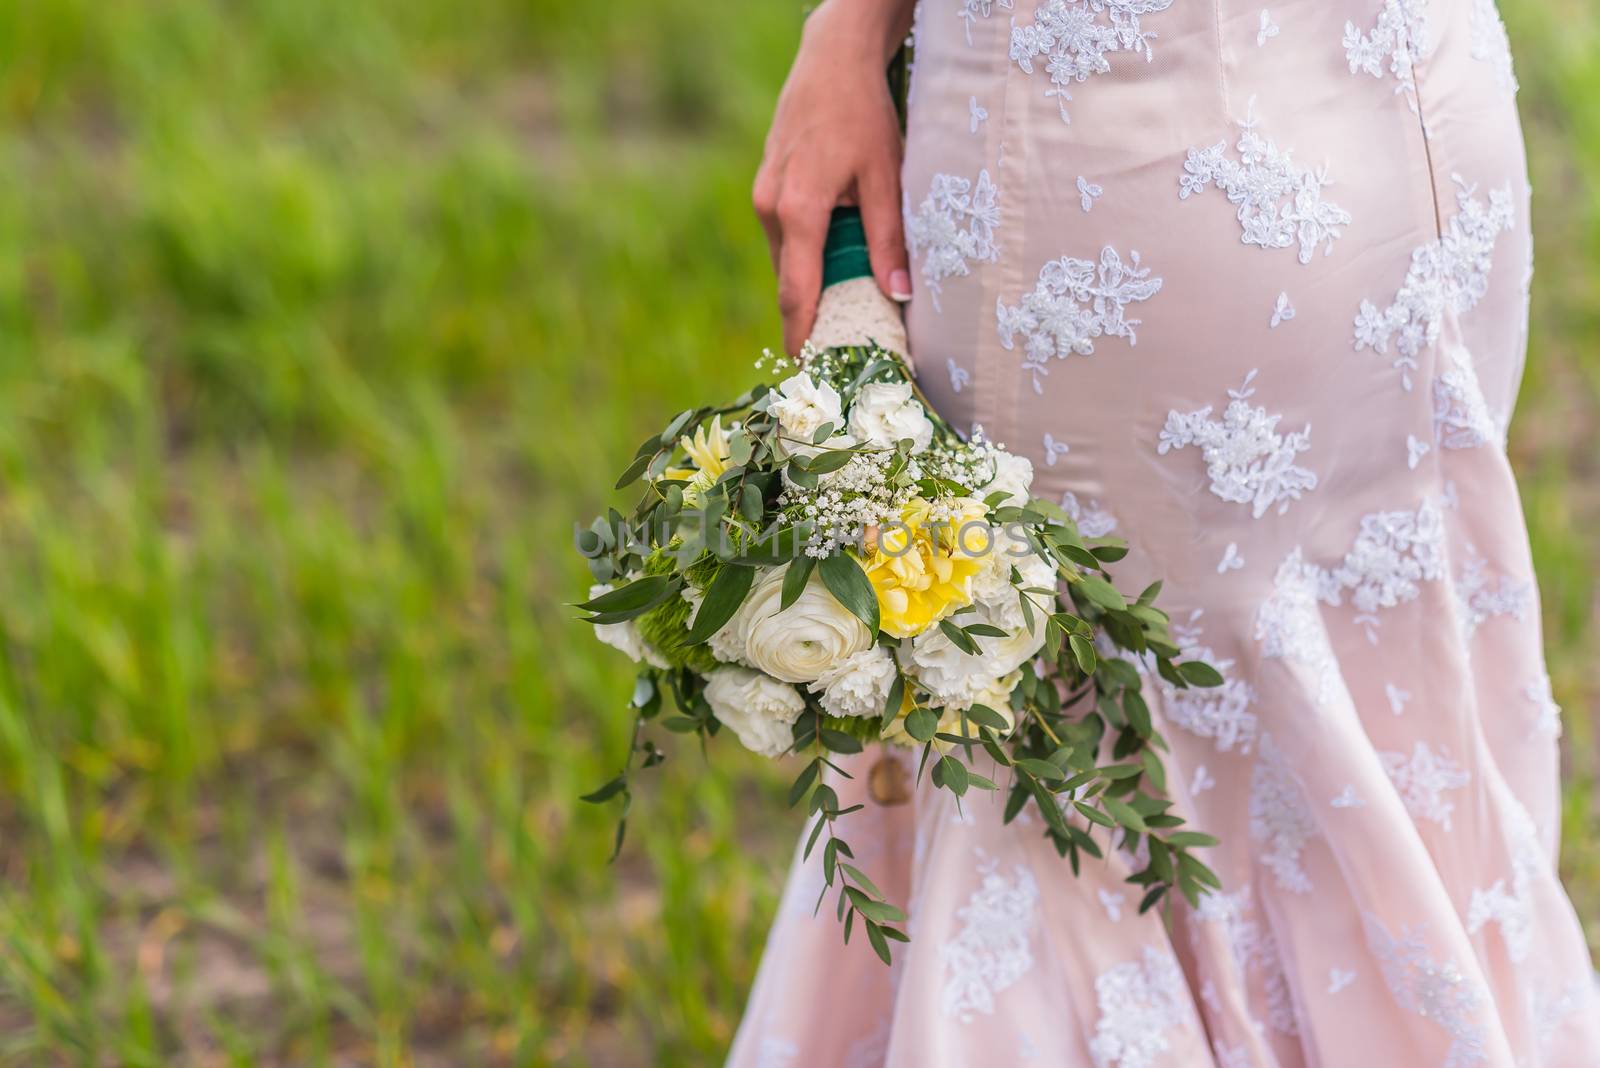 wedding bouquet in hands of the bride on background of the dress